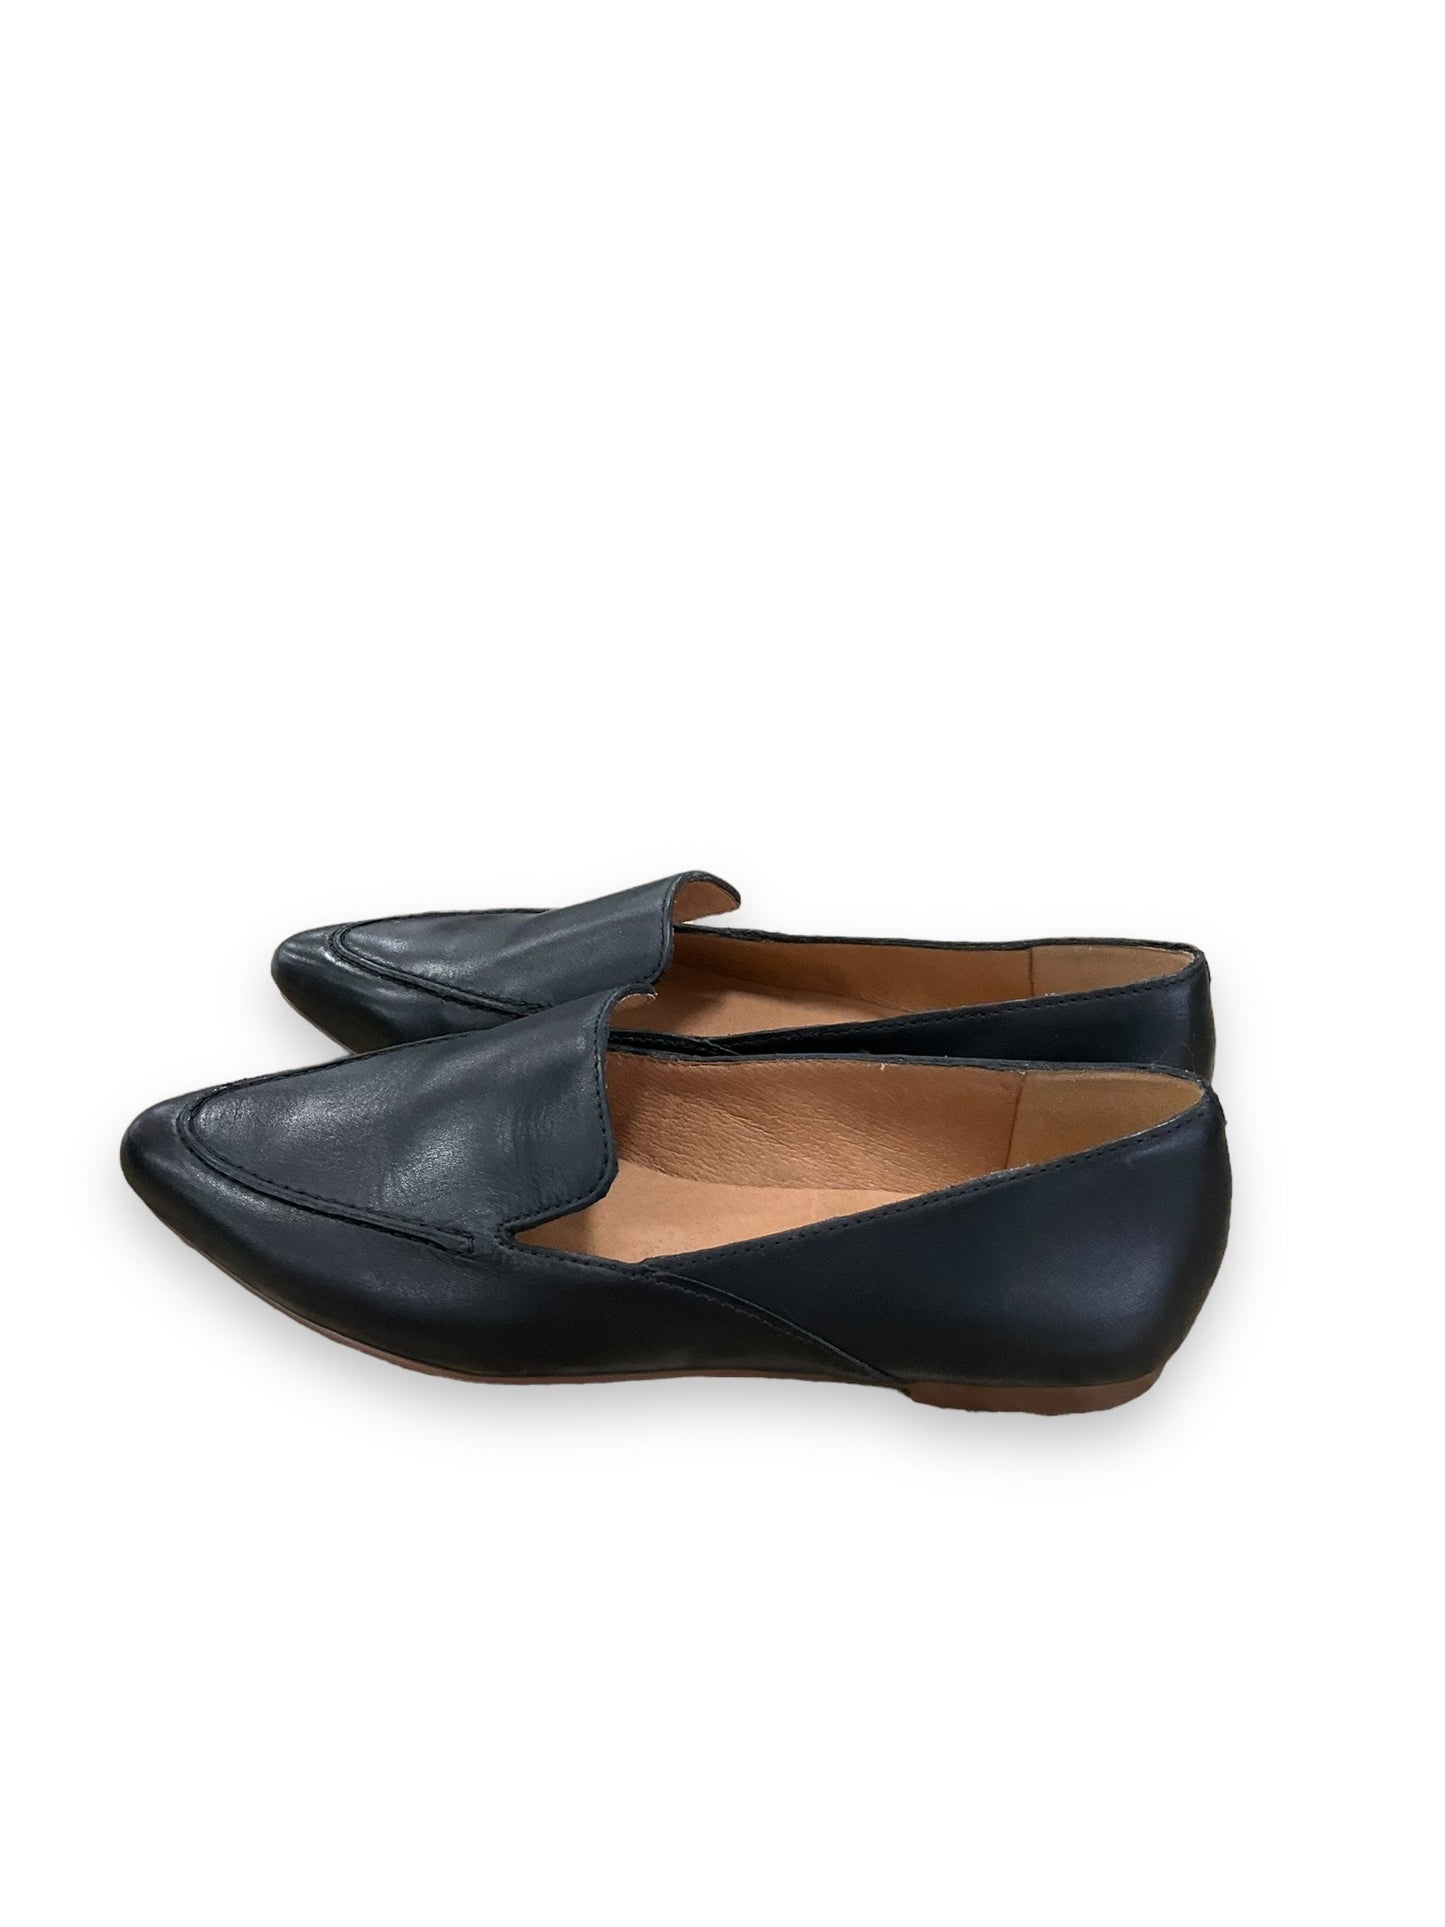 Black Shoes Flats Madewell, Size 7